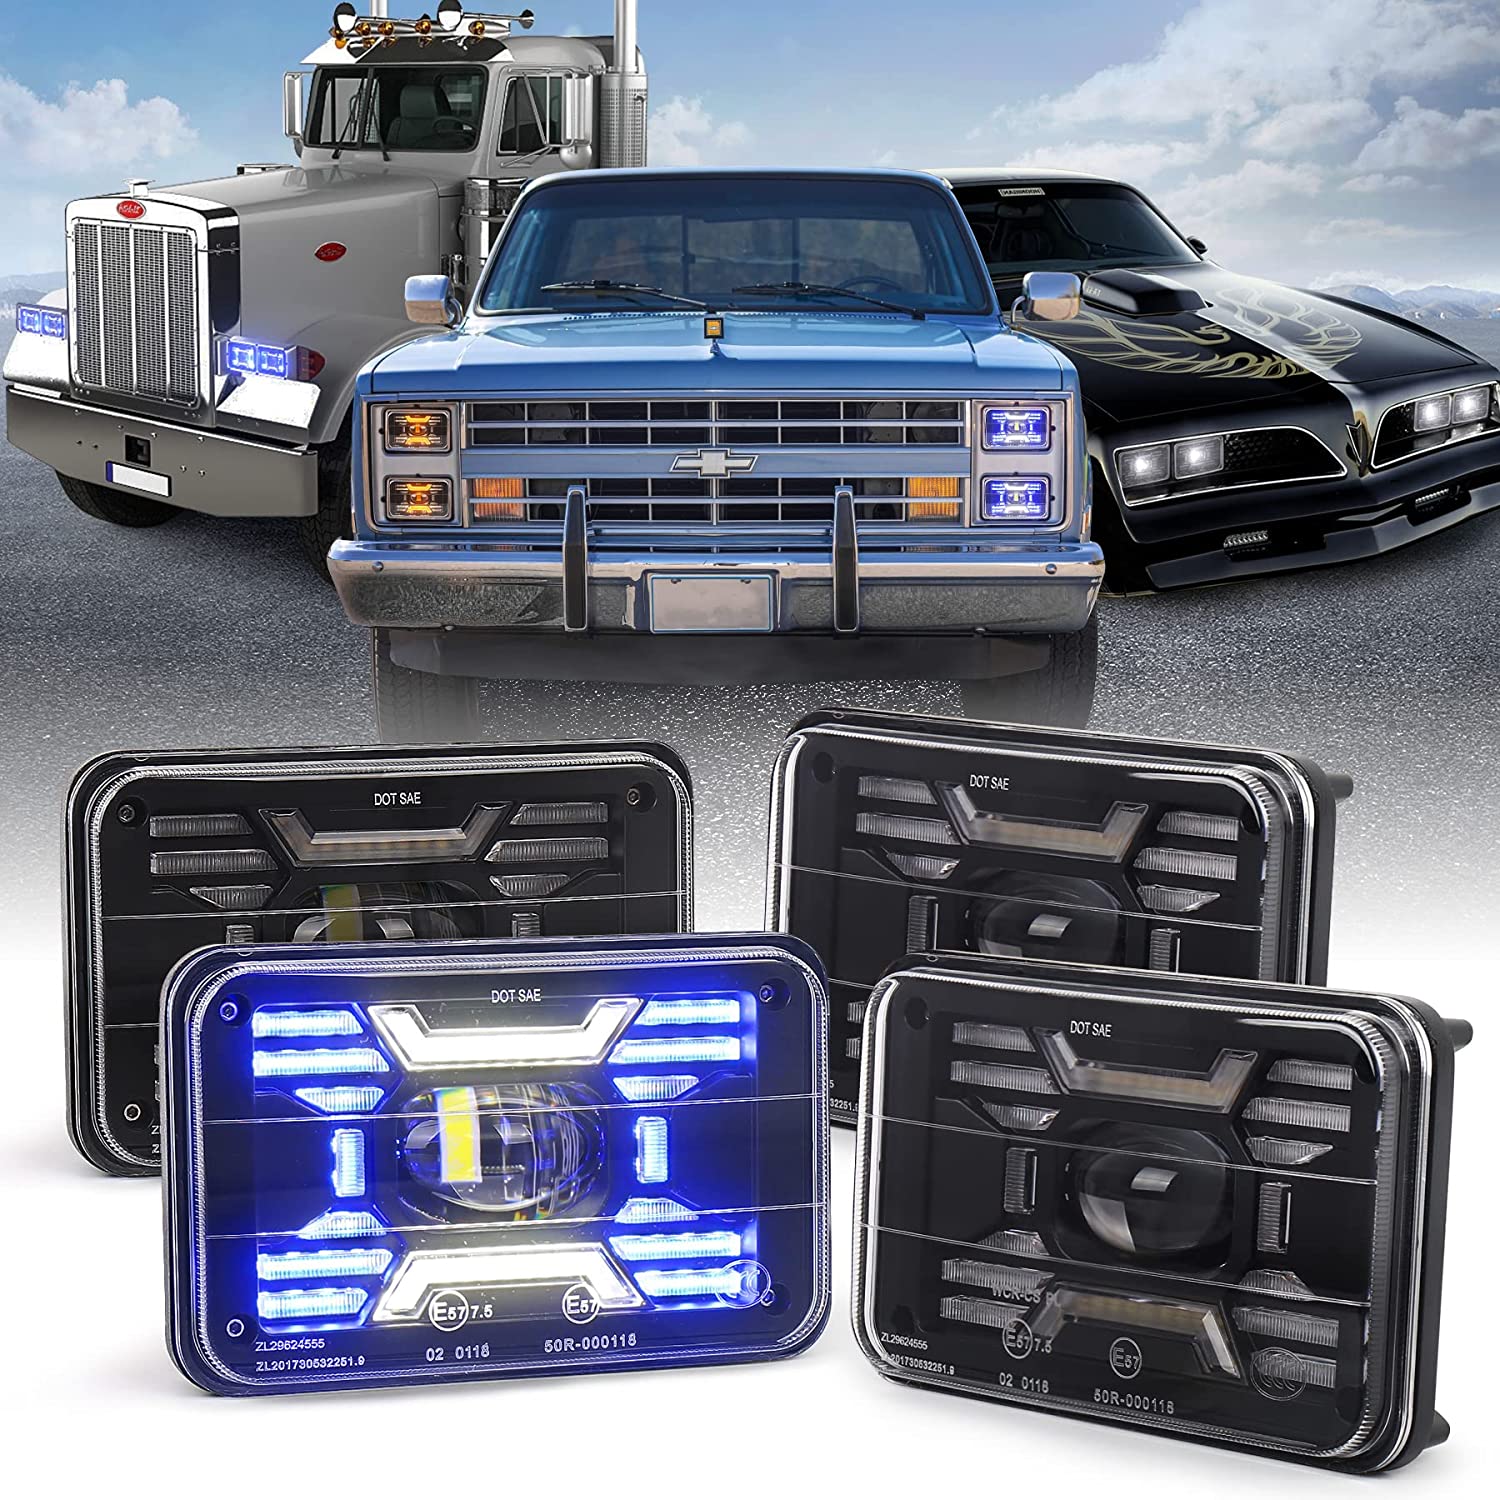 4x6 inch LED Headlights, Square Headlights Exclusive X Design White&Blue DRL Amber Turn Signal Compatible with Truck Peterbilt Kenworth Ford Monte Carlo Oldsmobile